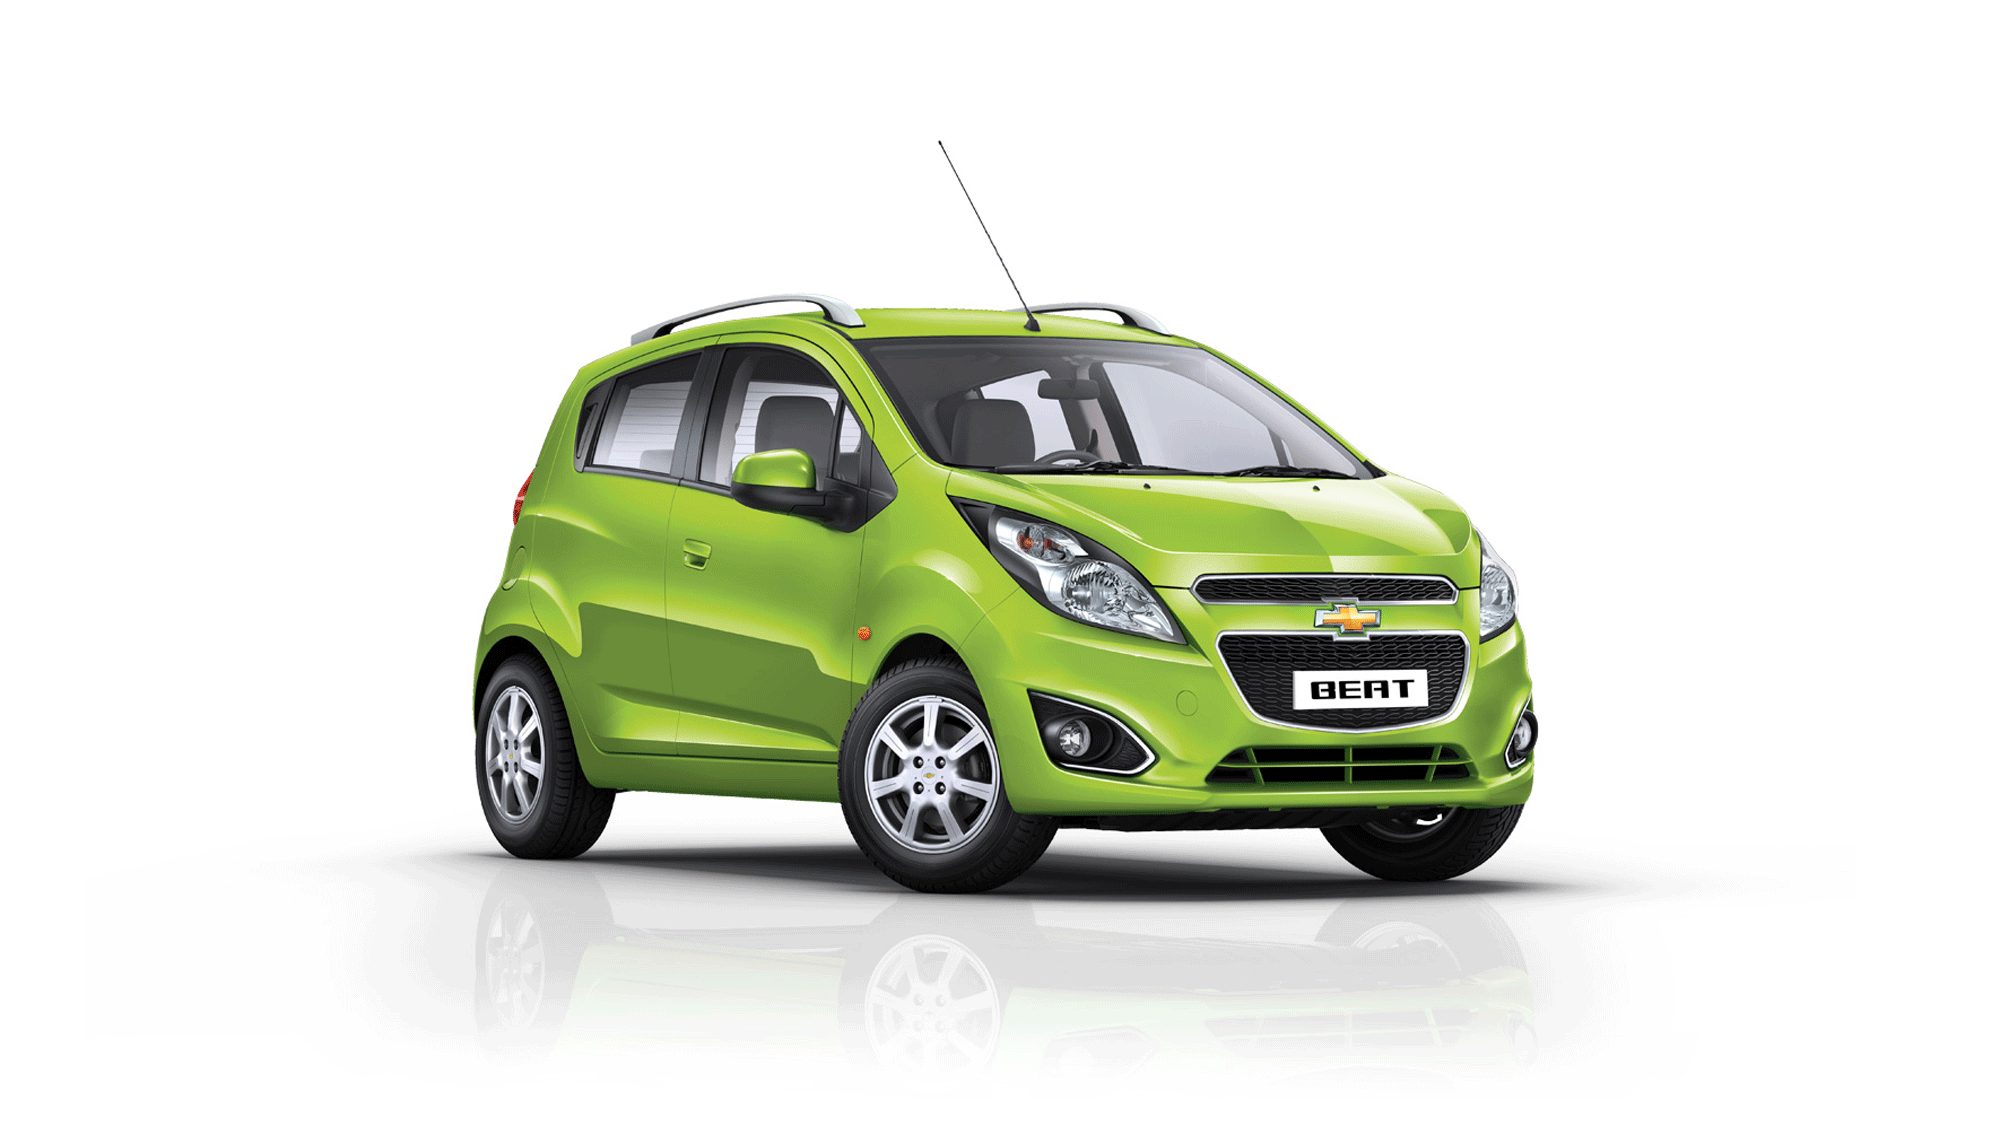 Chevrolet Beat models manufactured between December 2010 and July 2014 have been recalled due to safety issues. (Photo: Chevrolet India)